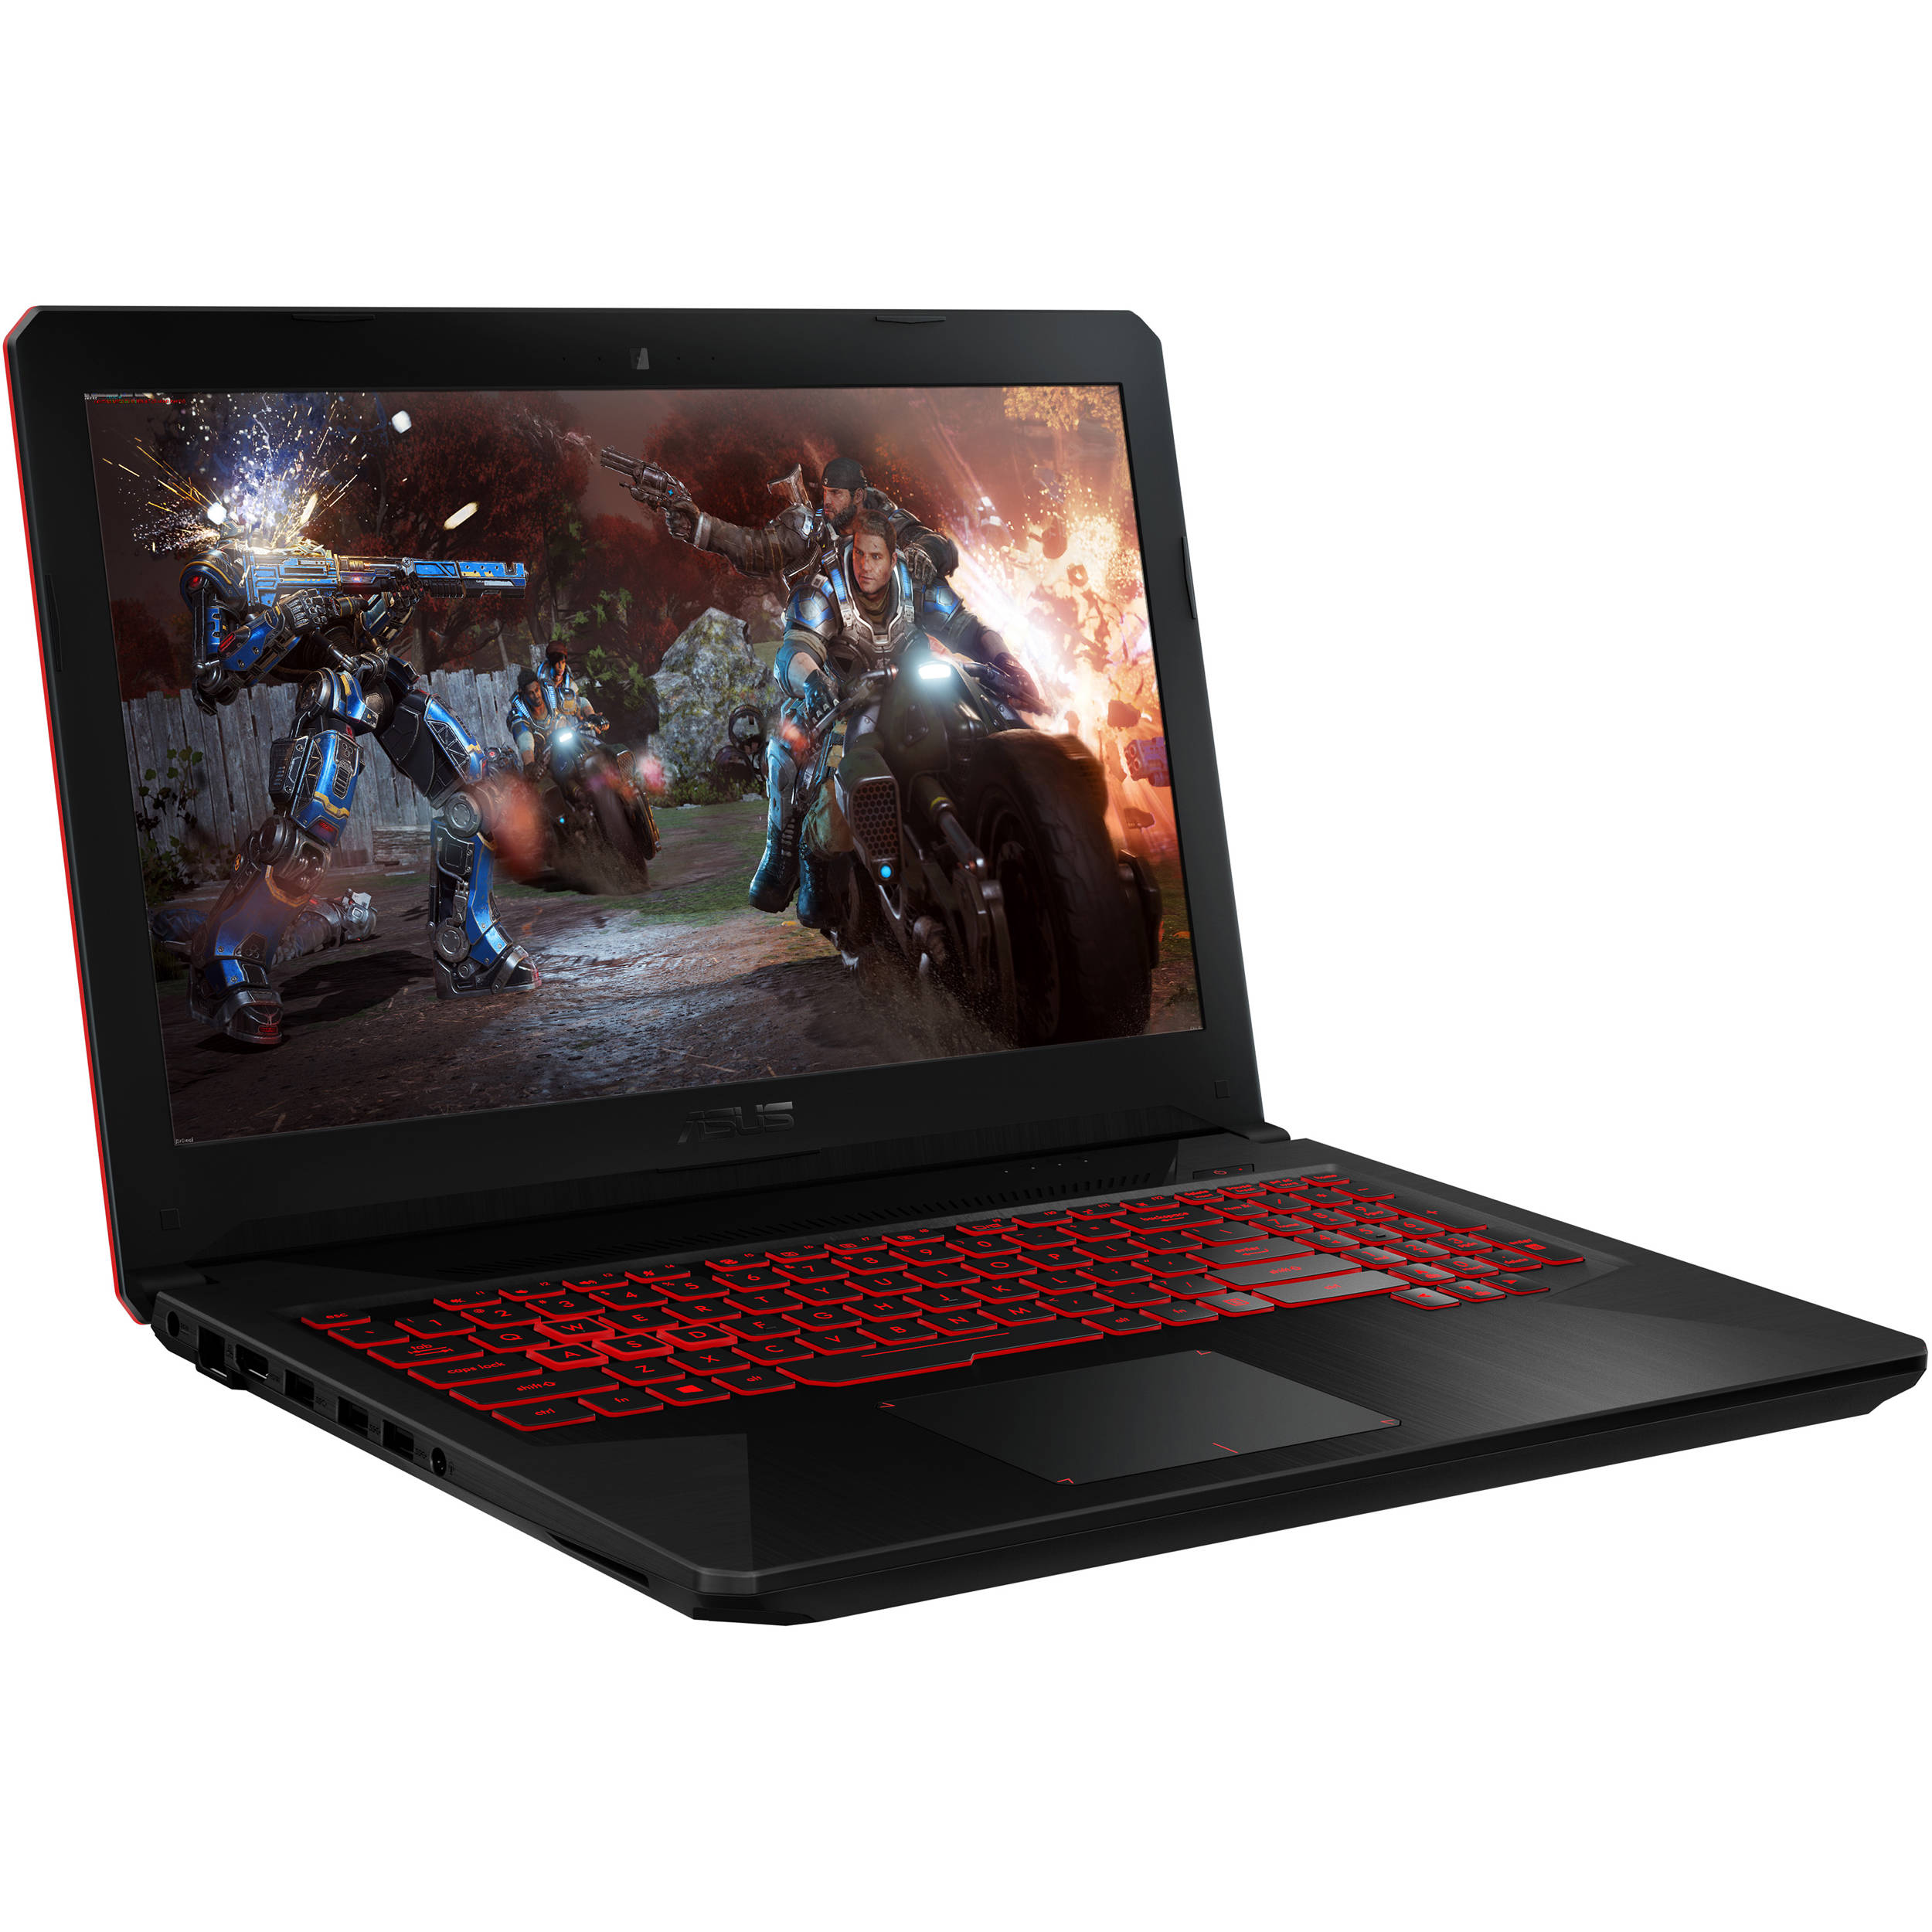 Asus tuf gaming intel core i5. ASUS fx504g. ASUS fx504gd-e41023t. ASUS TUF fx504g. Ноутбук ASUS fx504gd.